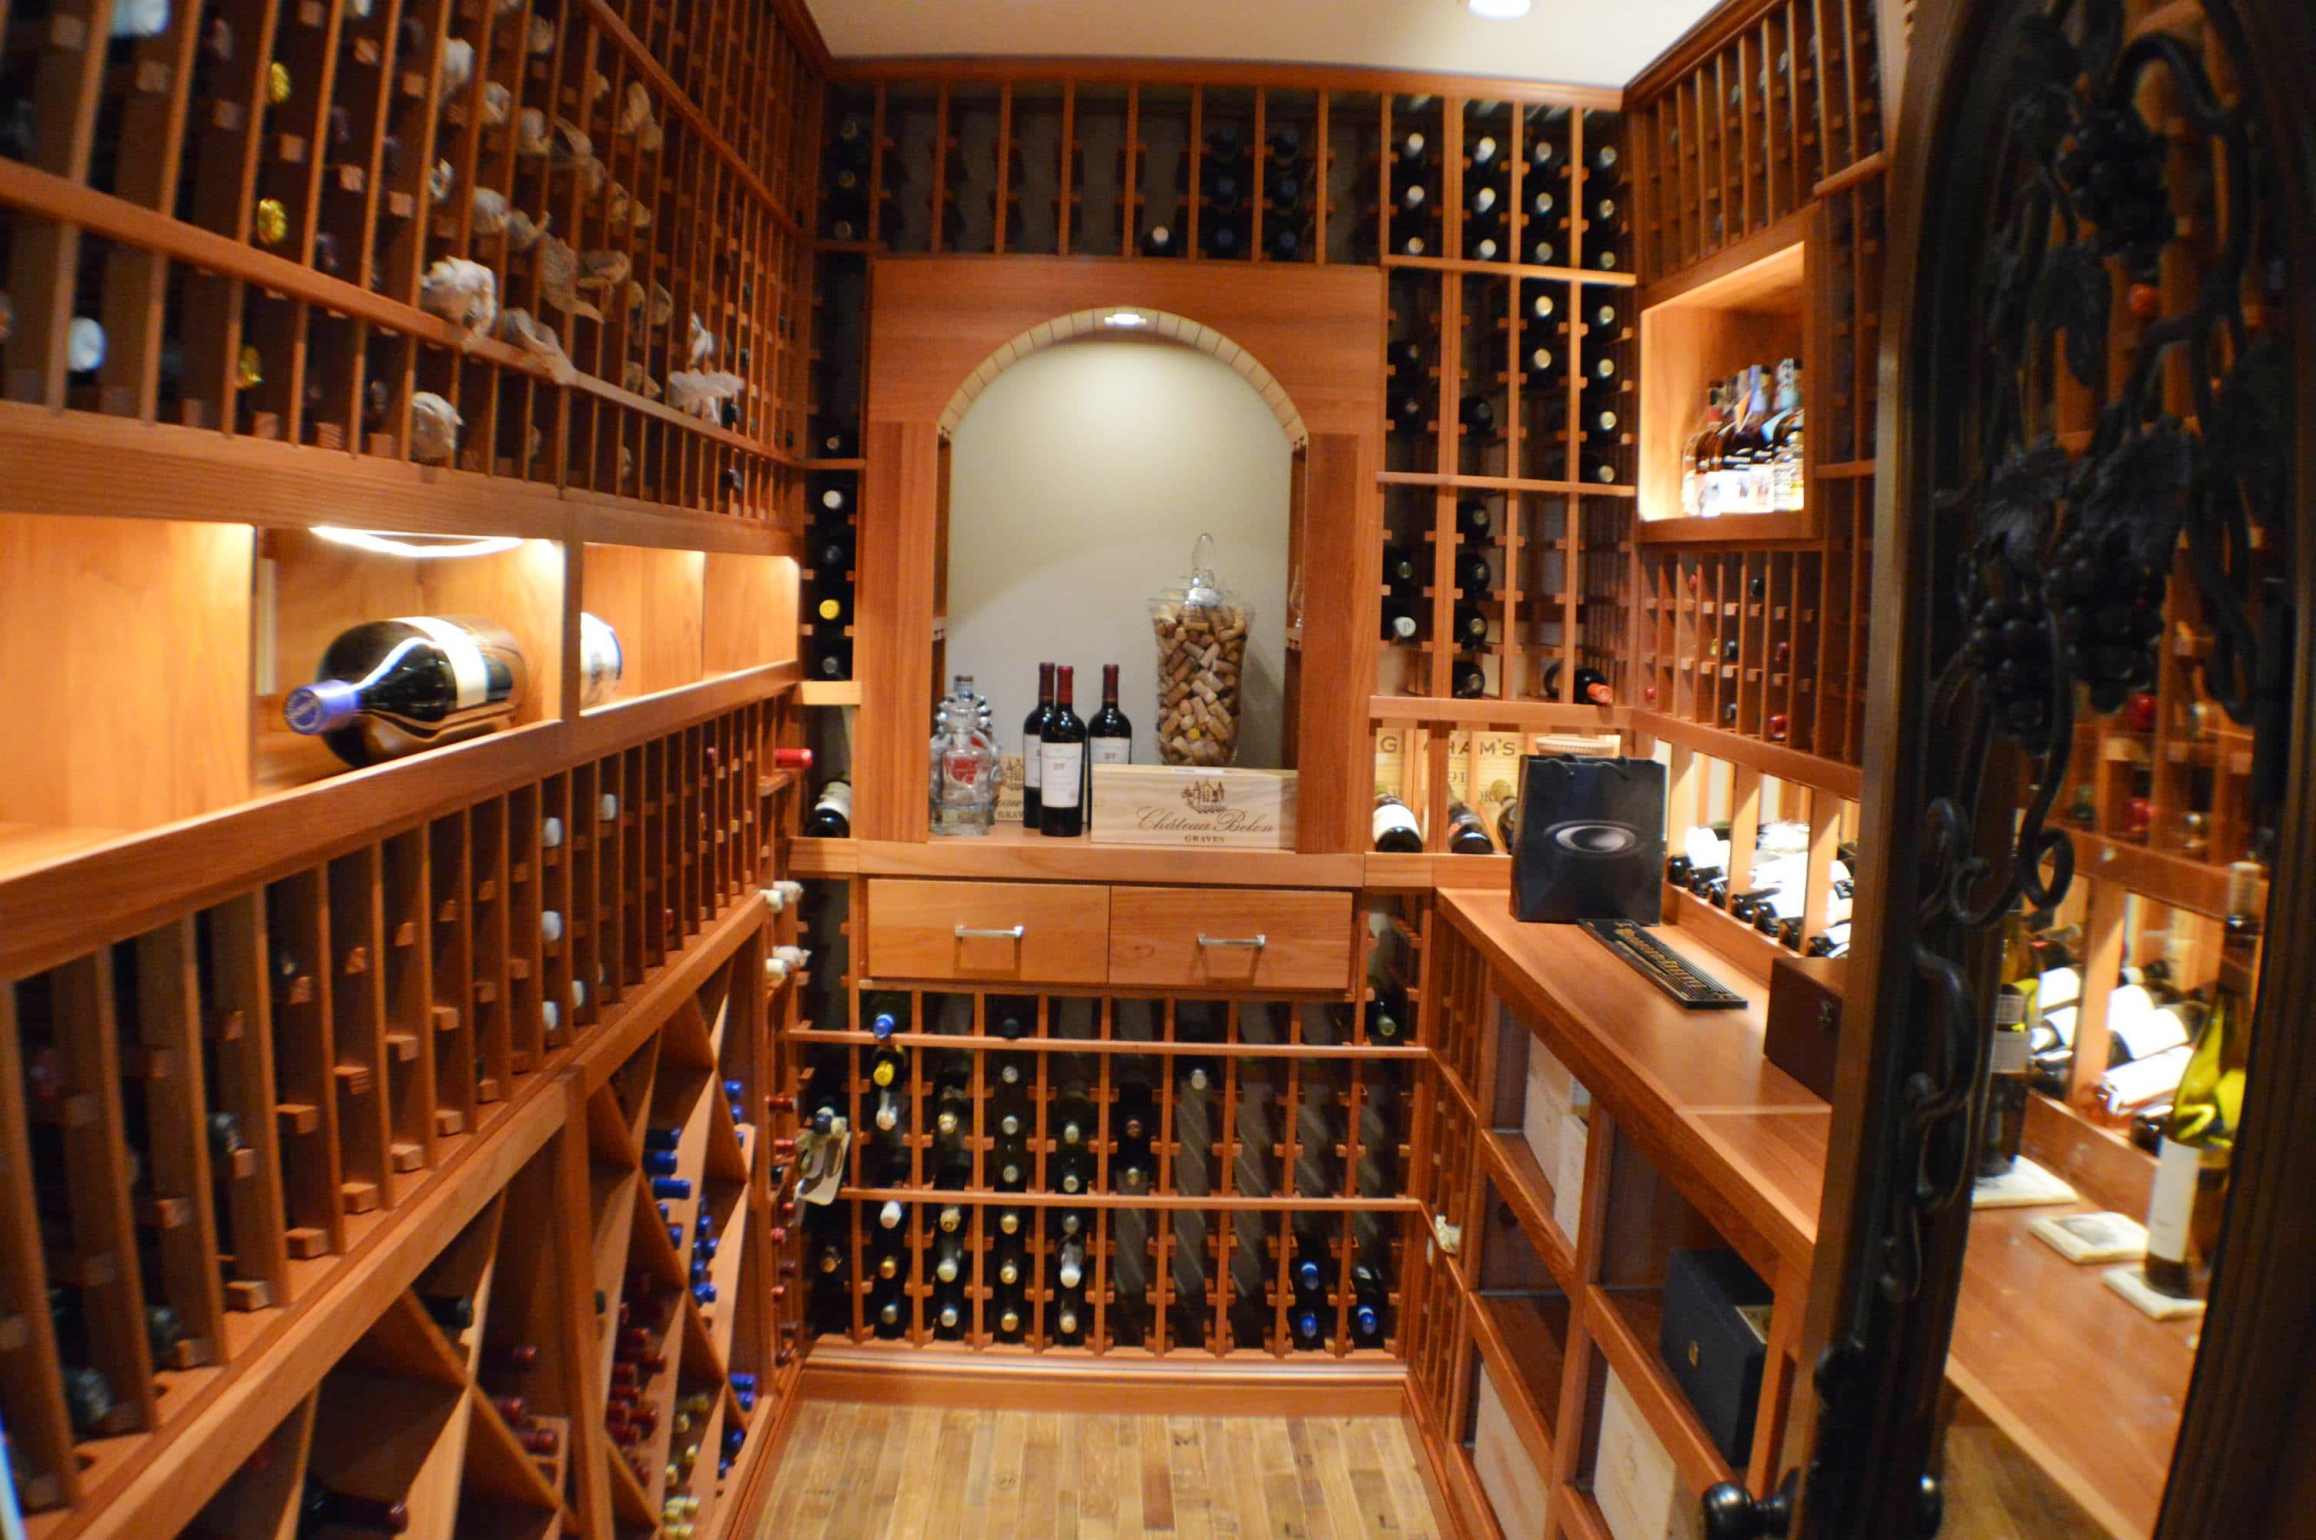 Wooden Wine Racks are Ideal for Building Traditional San Diego Custom Wine Cellars